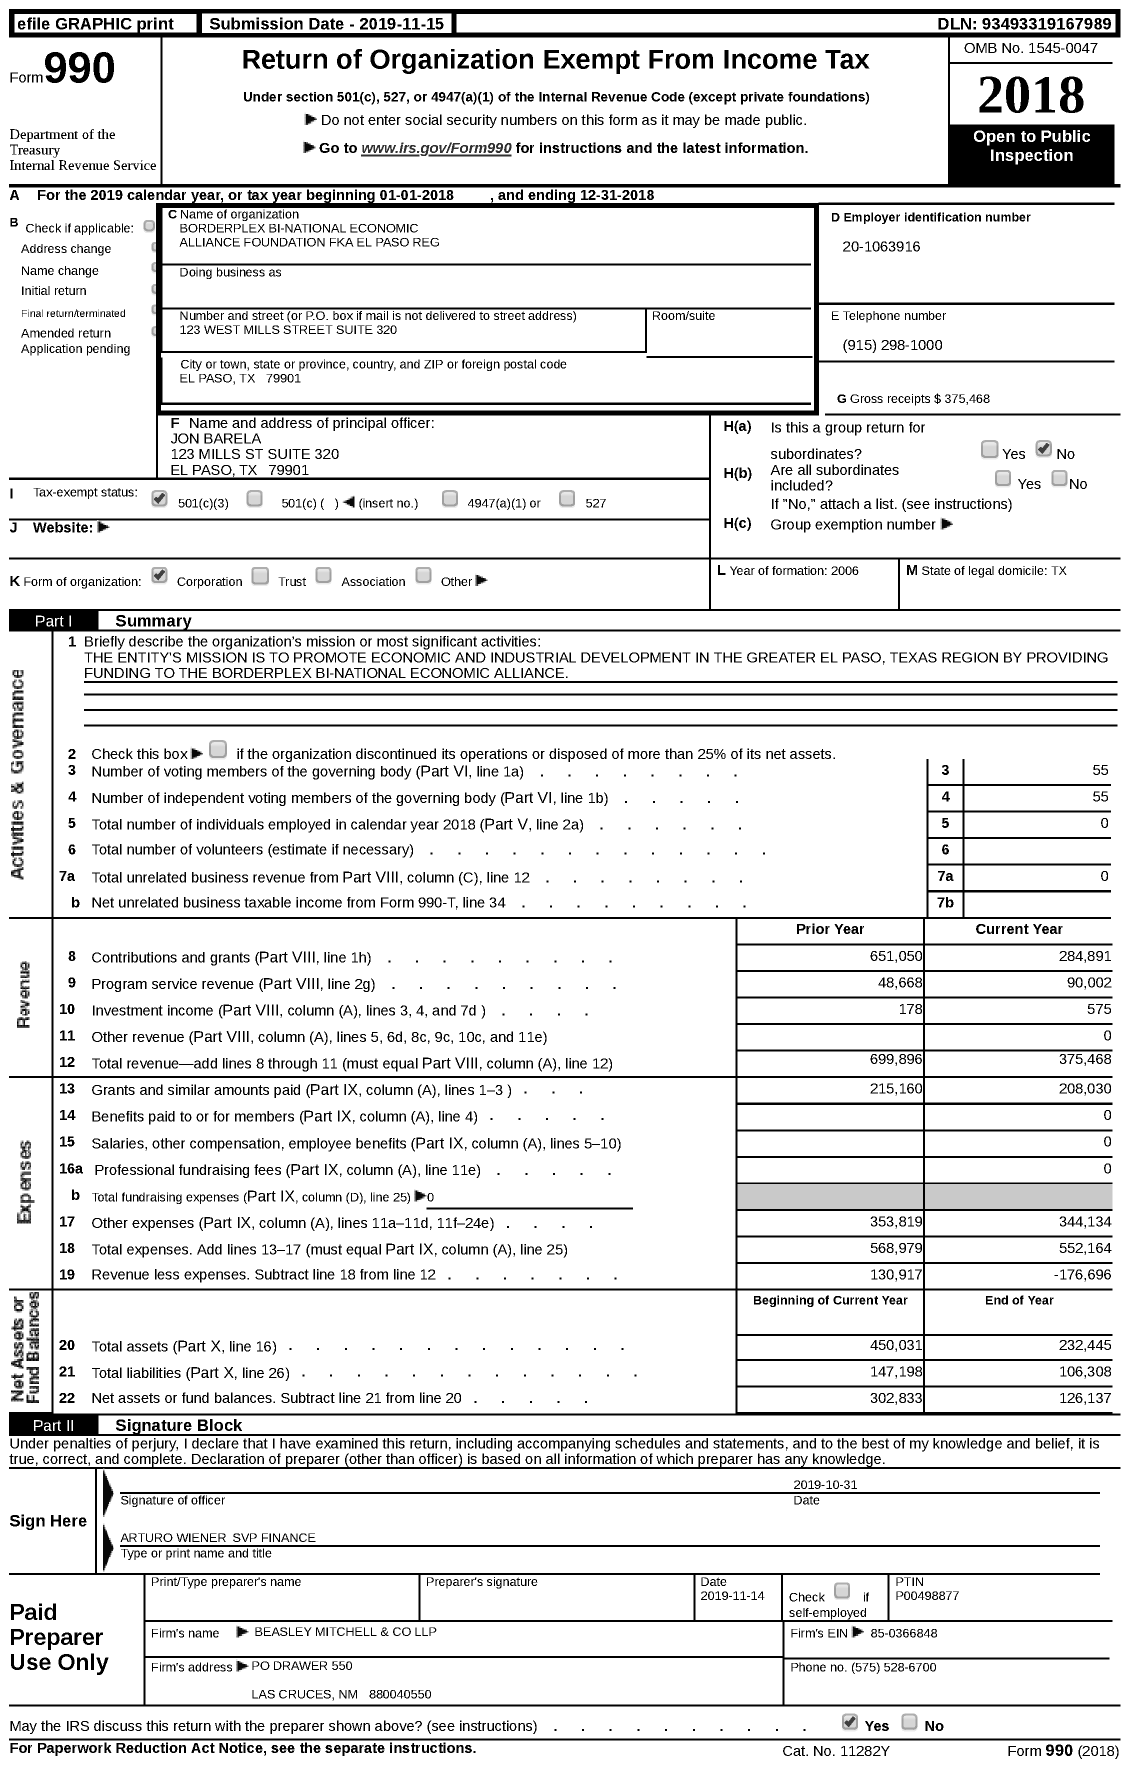 Image of first page of 2018 Form 990 for Borderplex Bi-National Economic Alliance Foundation